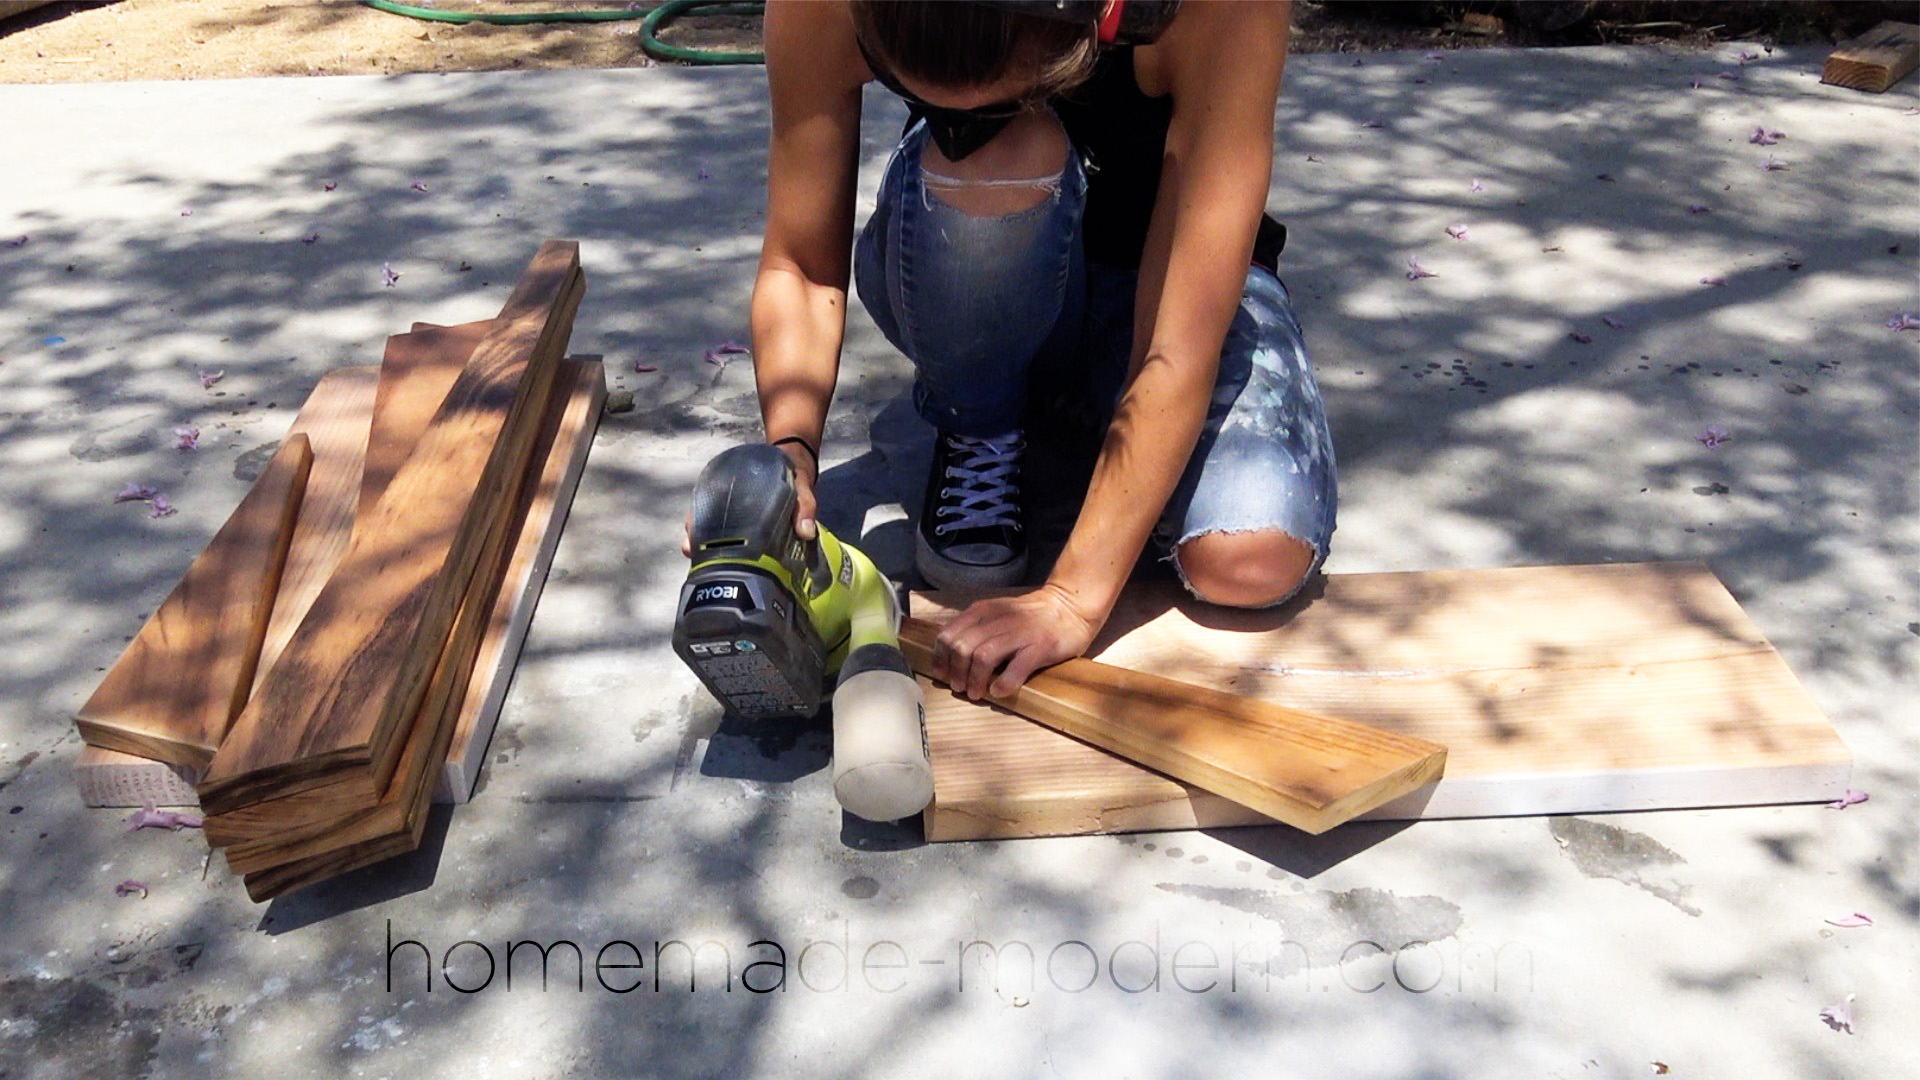 This DIY outdoor tigerwood dining table can be made using just three power tools. For more information go to HomeMade-Modern.com